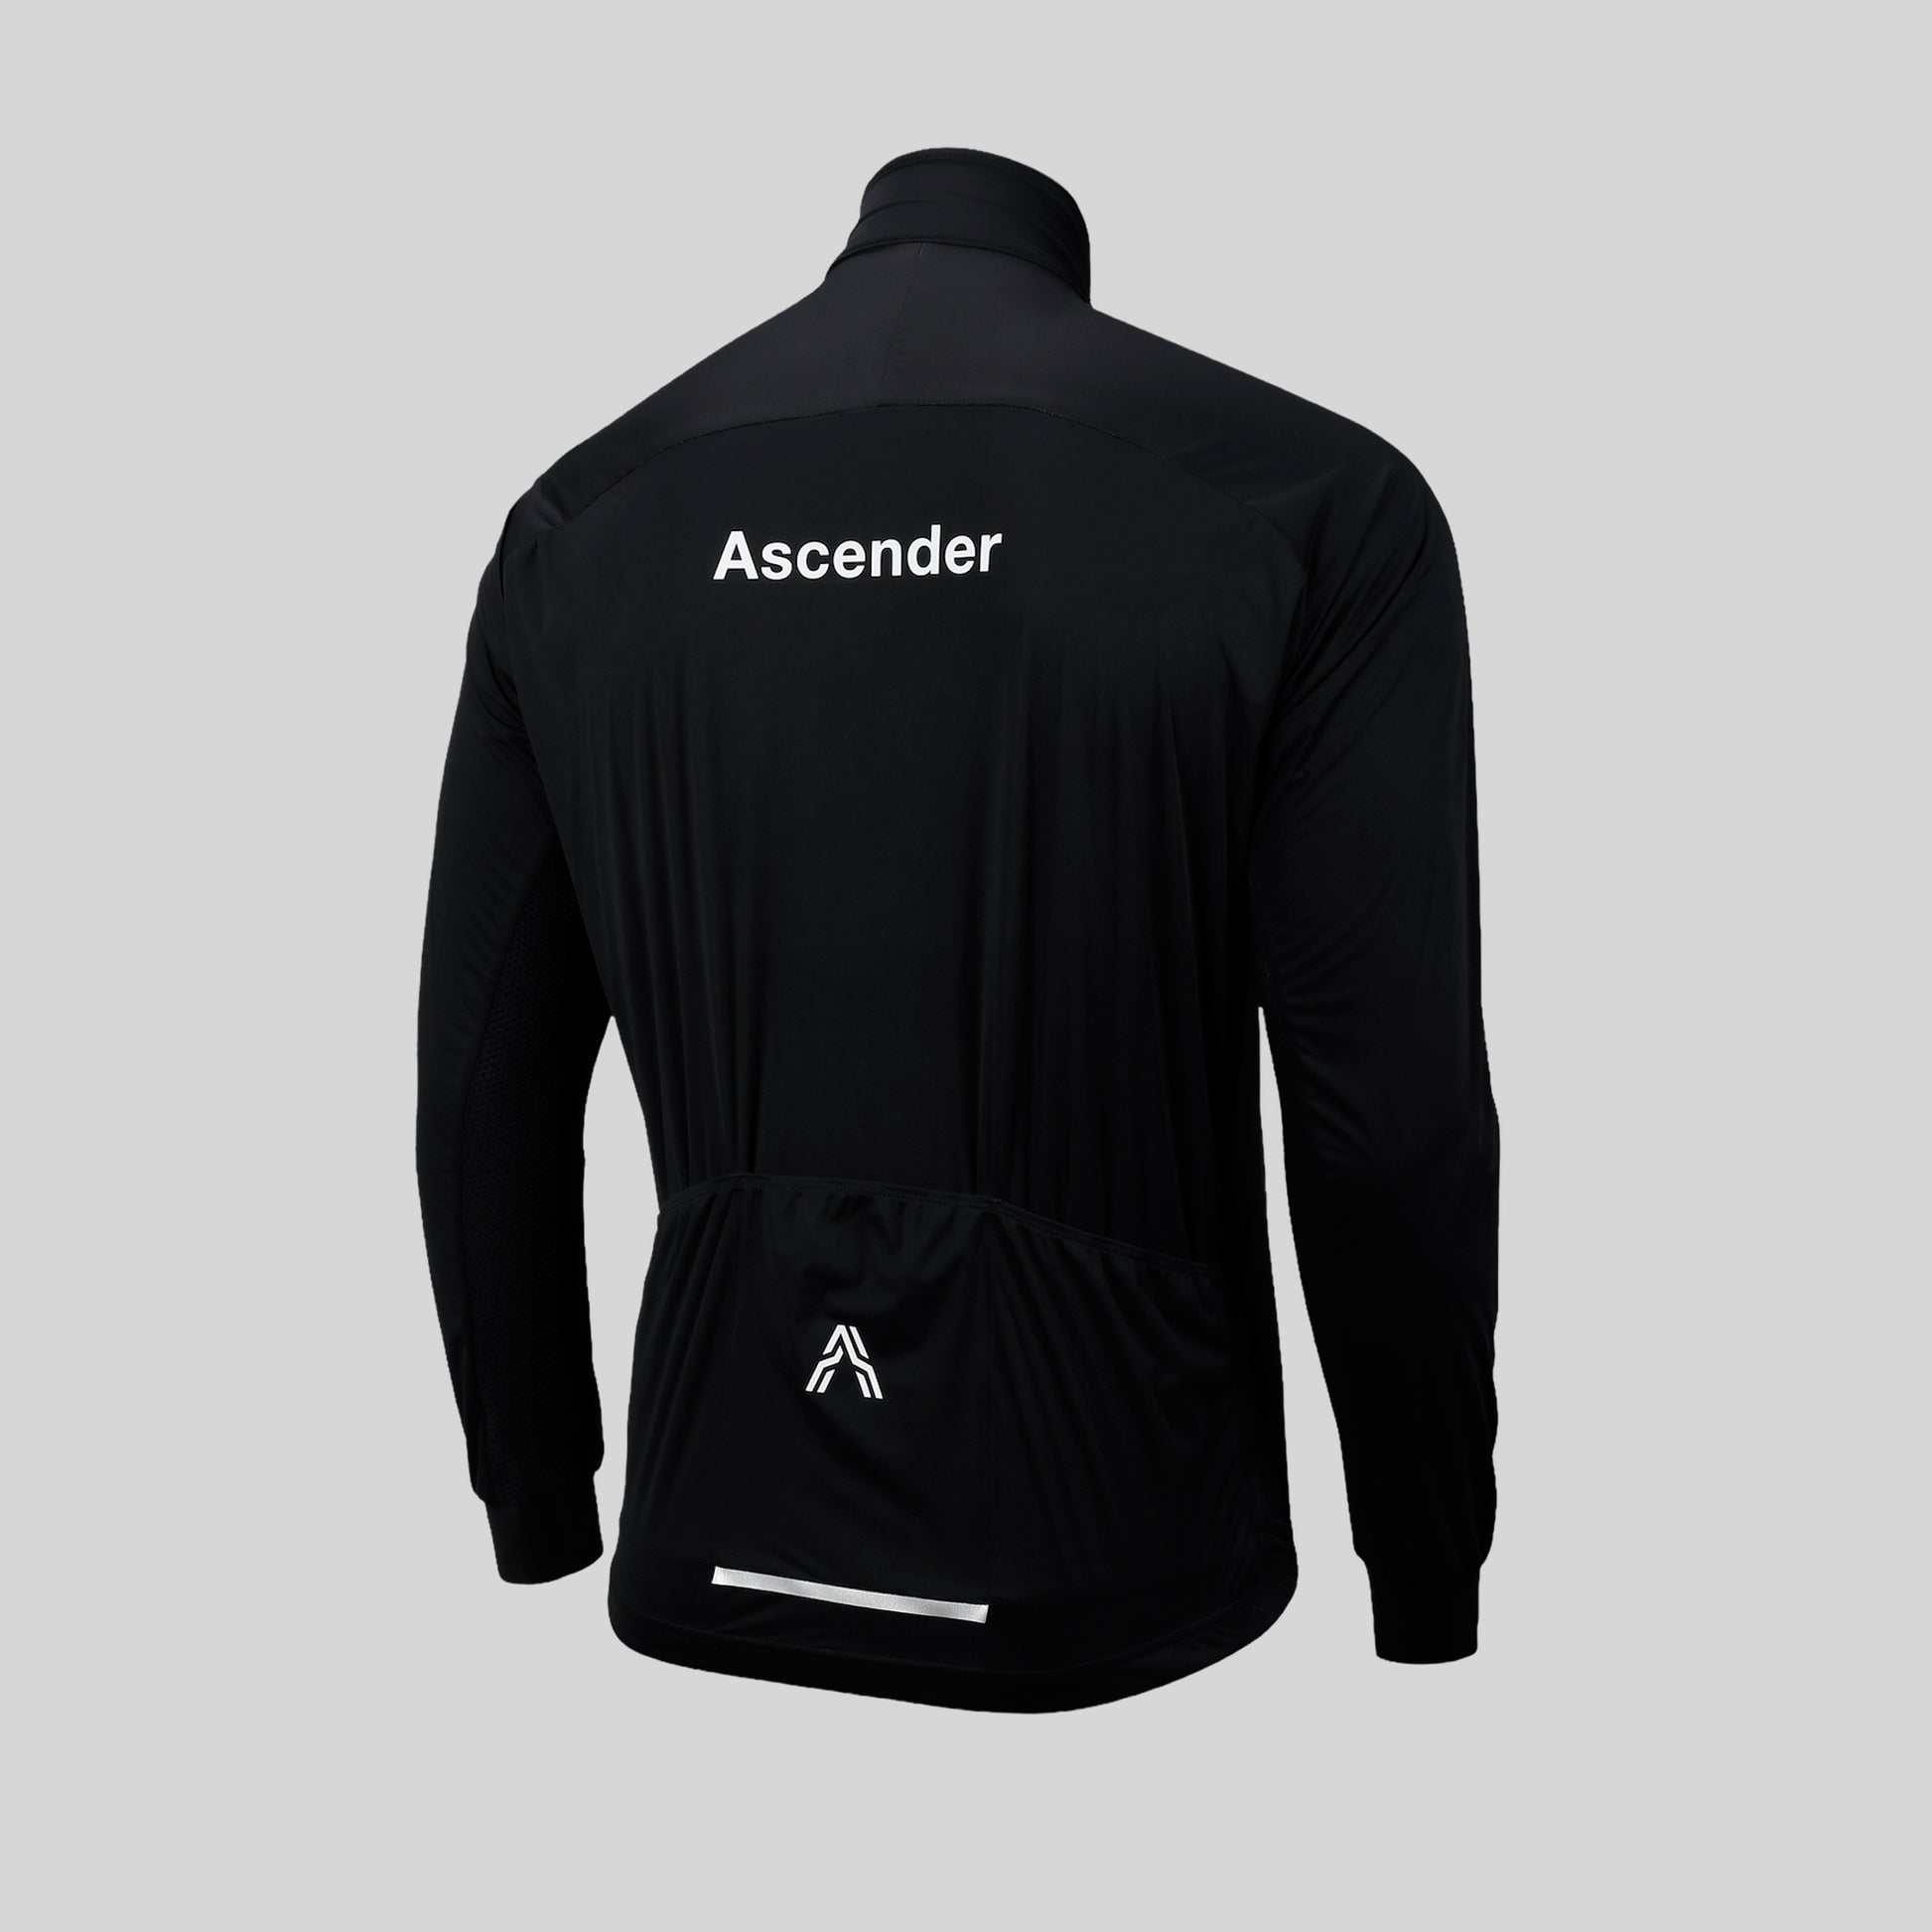  Aquarius Windproof and Waterproof Shield Jacket from Ascender Cycling Club in Zürich Switzerland Back View